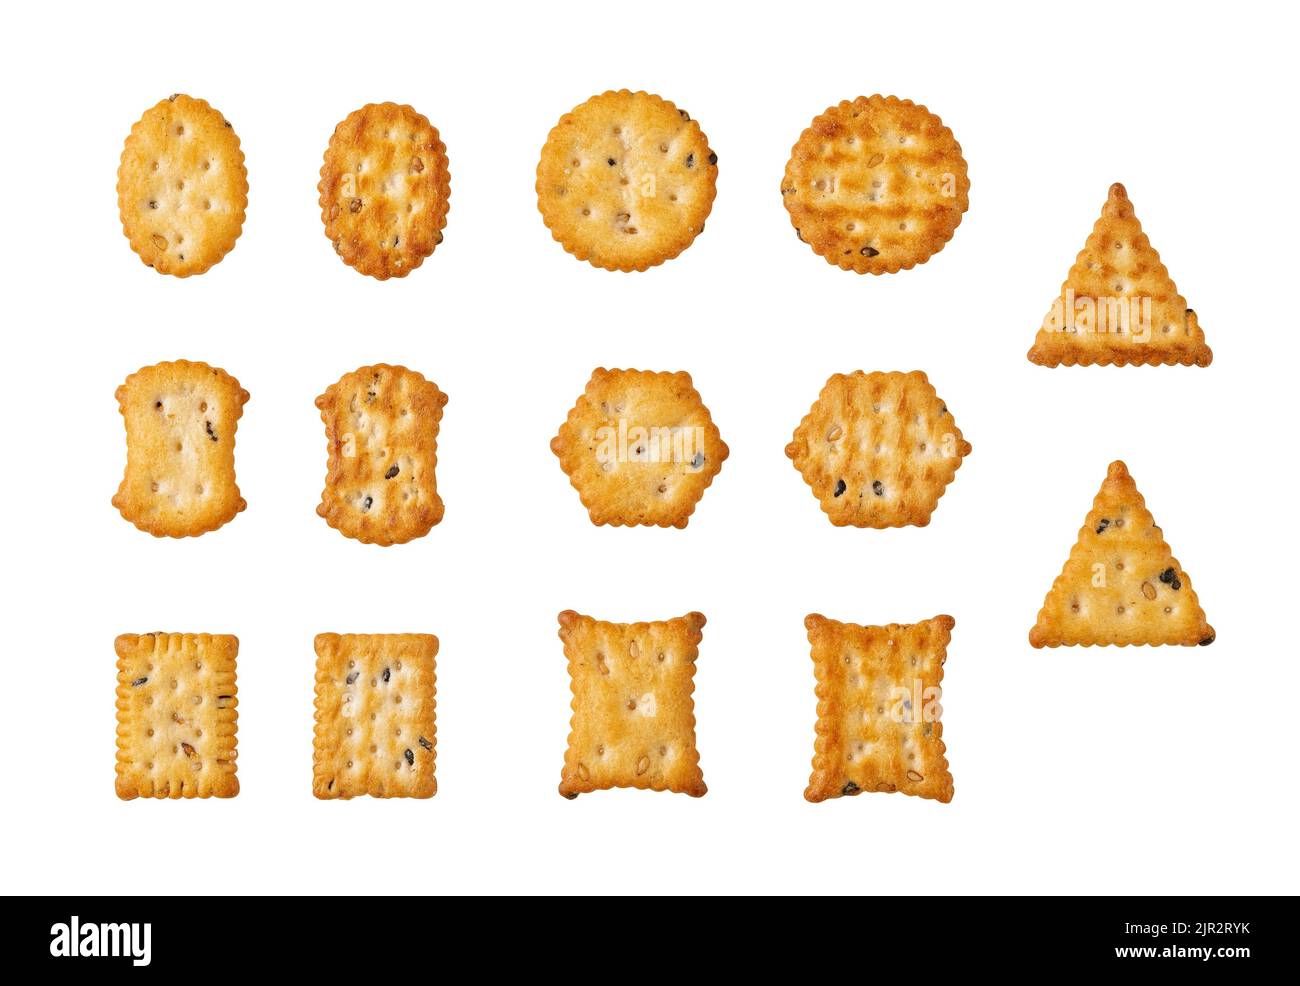 Saltine cracker variety isolated on a white background. Cutout of various shaped sesame cookies. Salty crackers with black and white sesame seeds set. Stock Photo